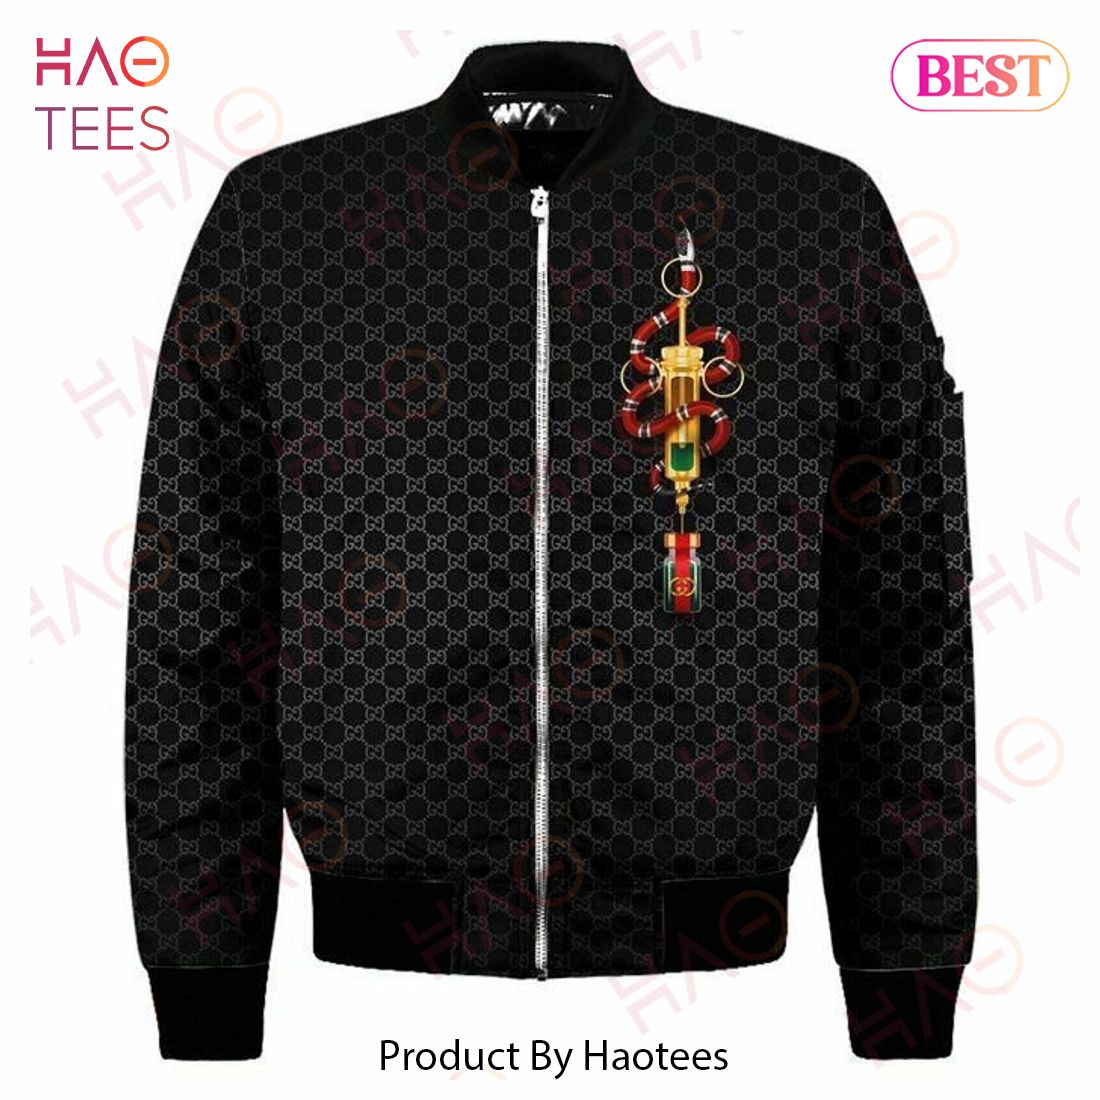 GC Black Bomber Jacket Luxury Brand Clothing Clothes Outfit – ZR61